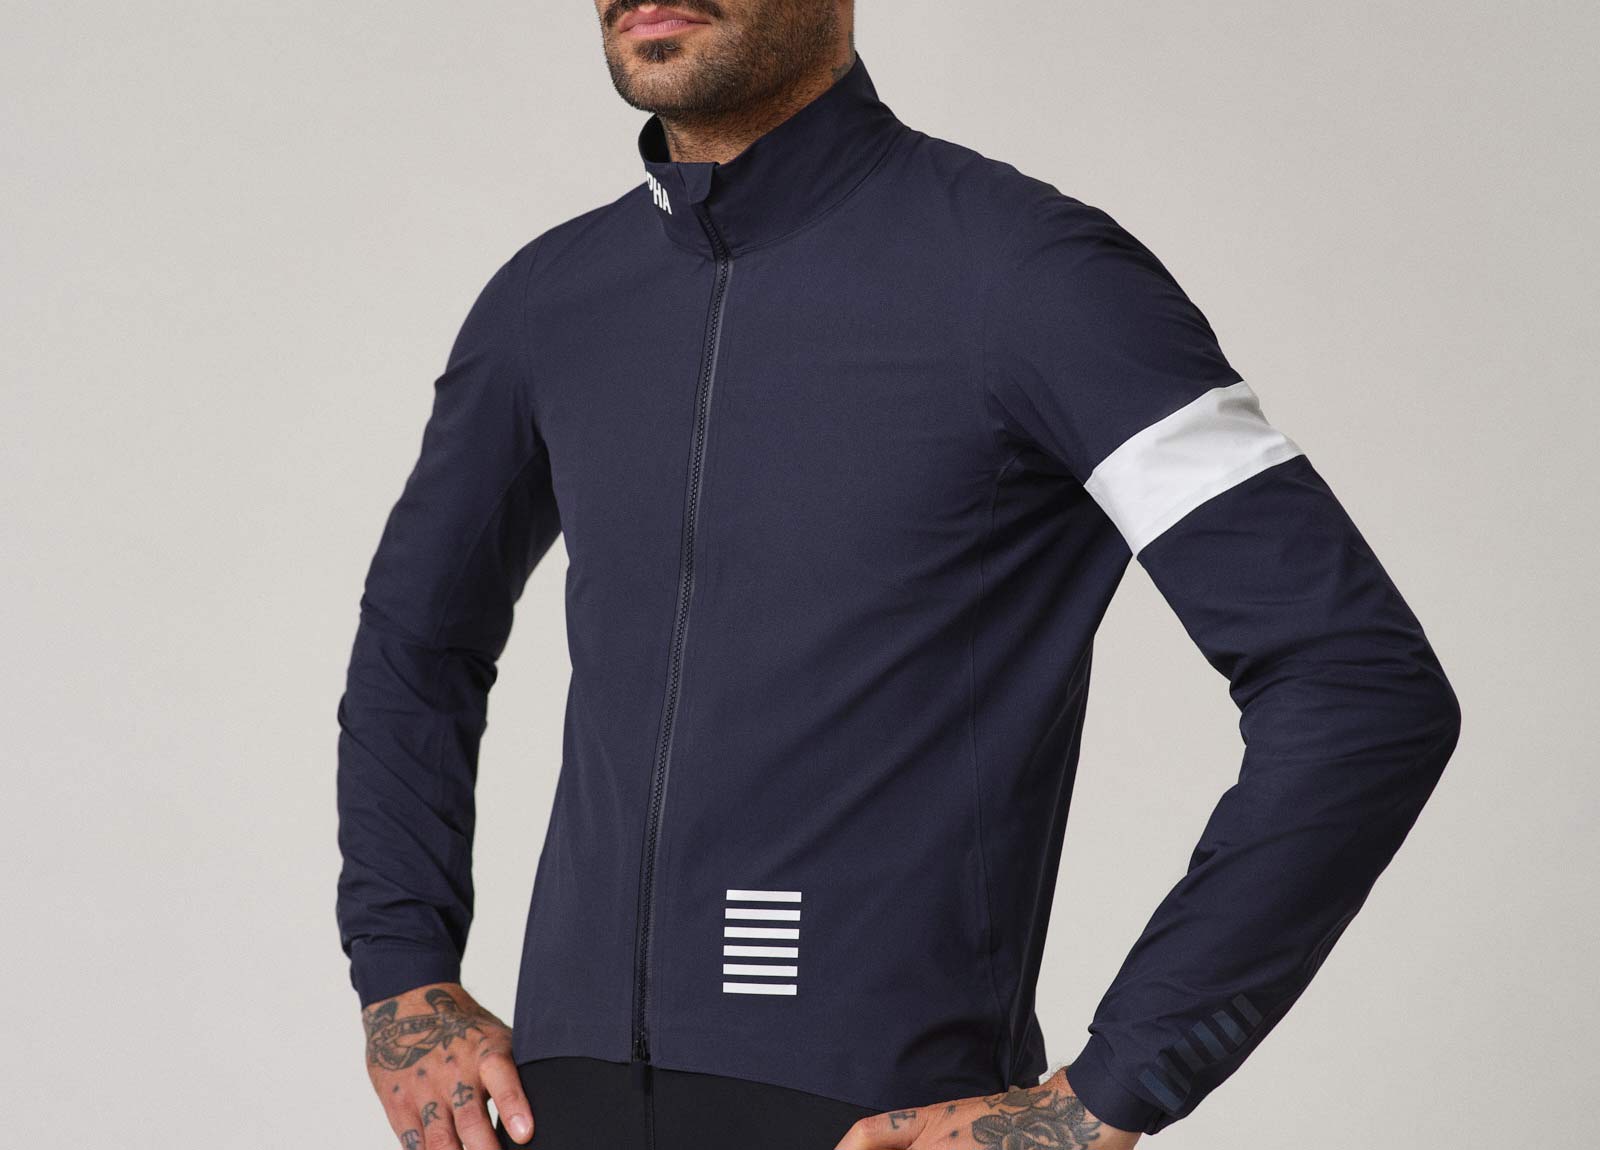 All-new Rapha Gore-Tex rain jackets for road, commuter rides